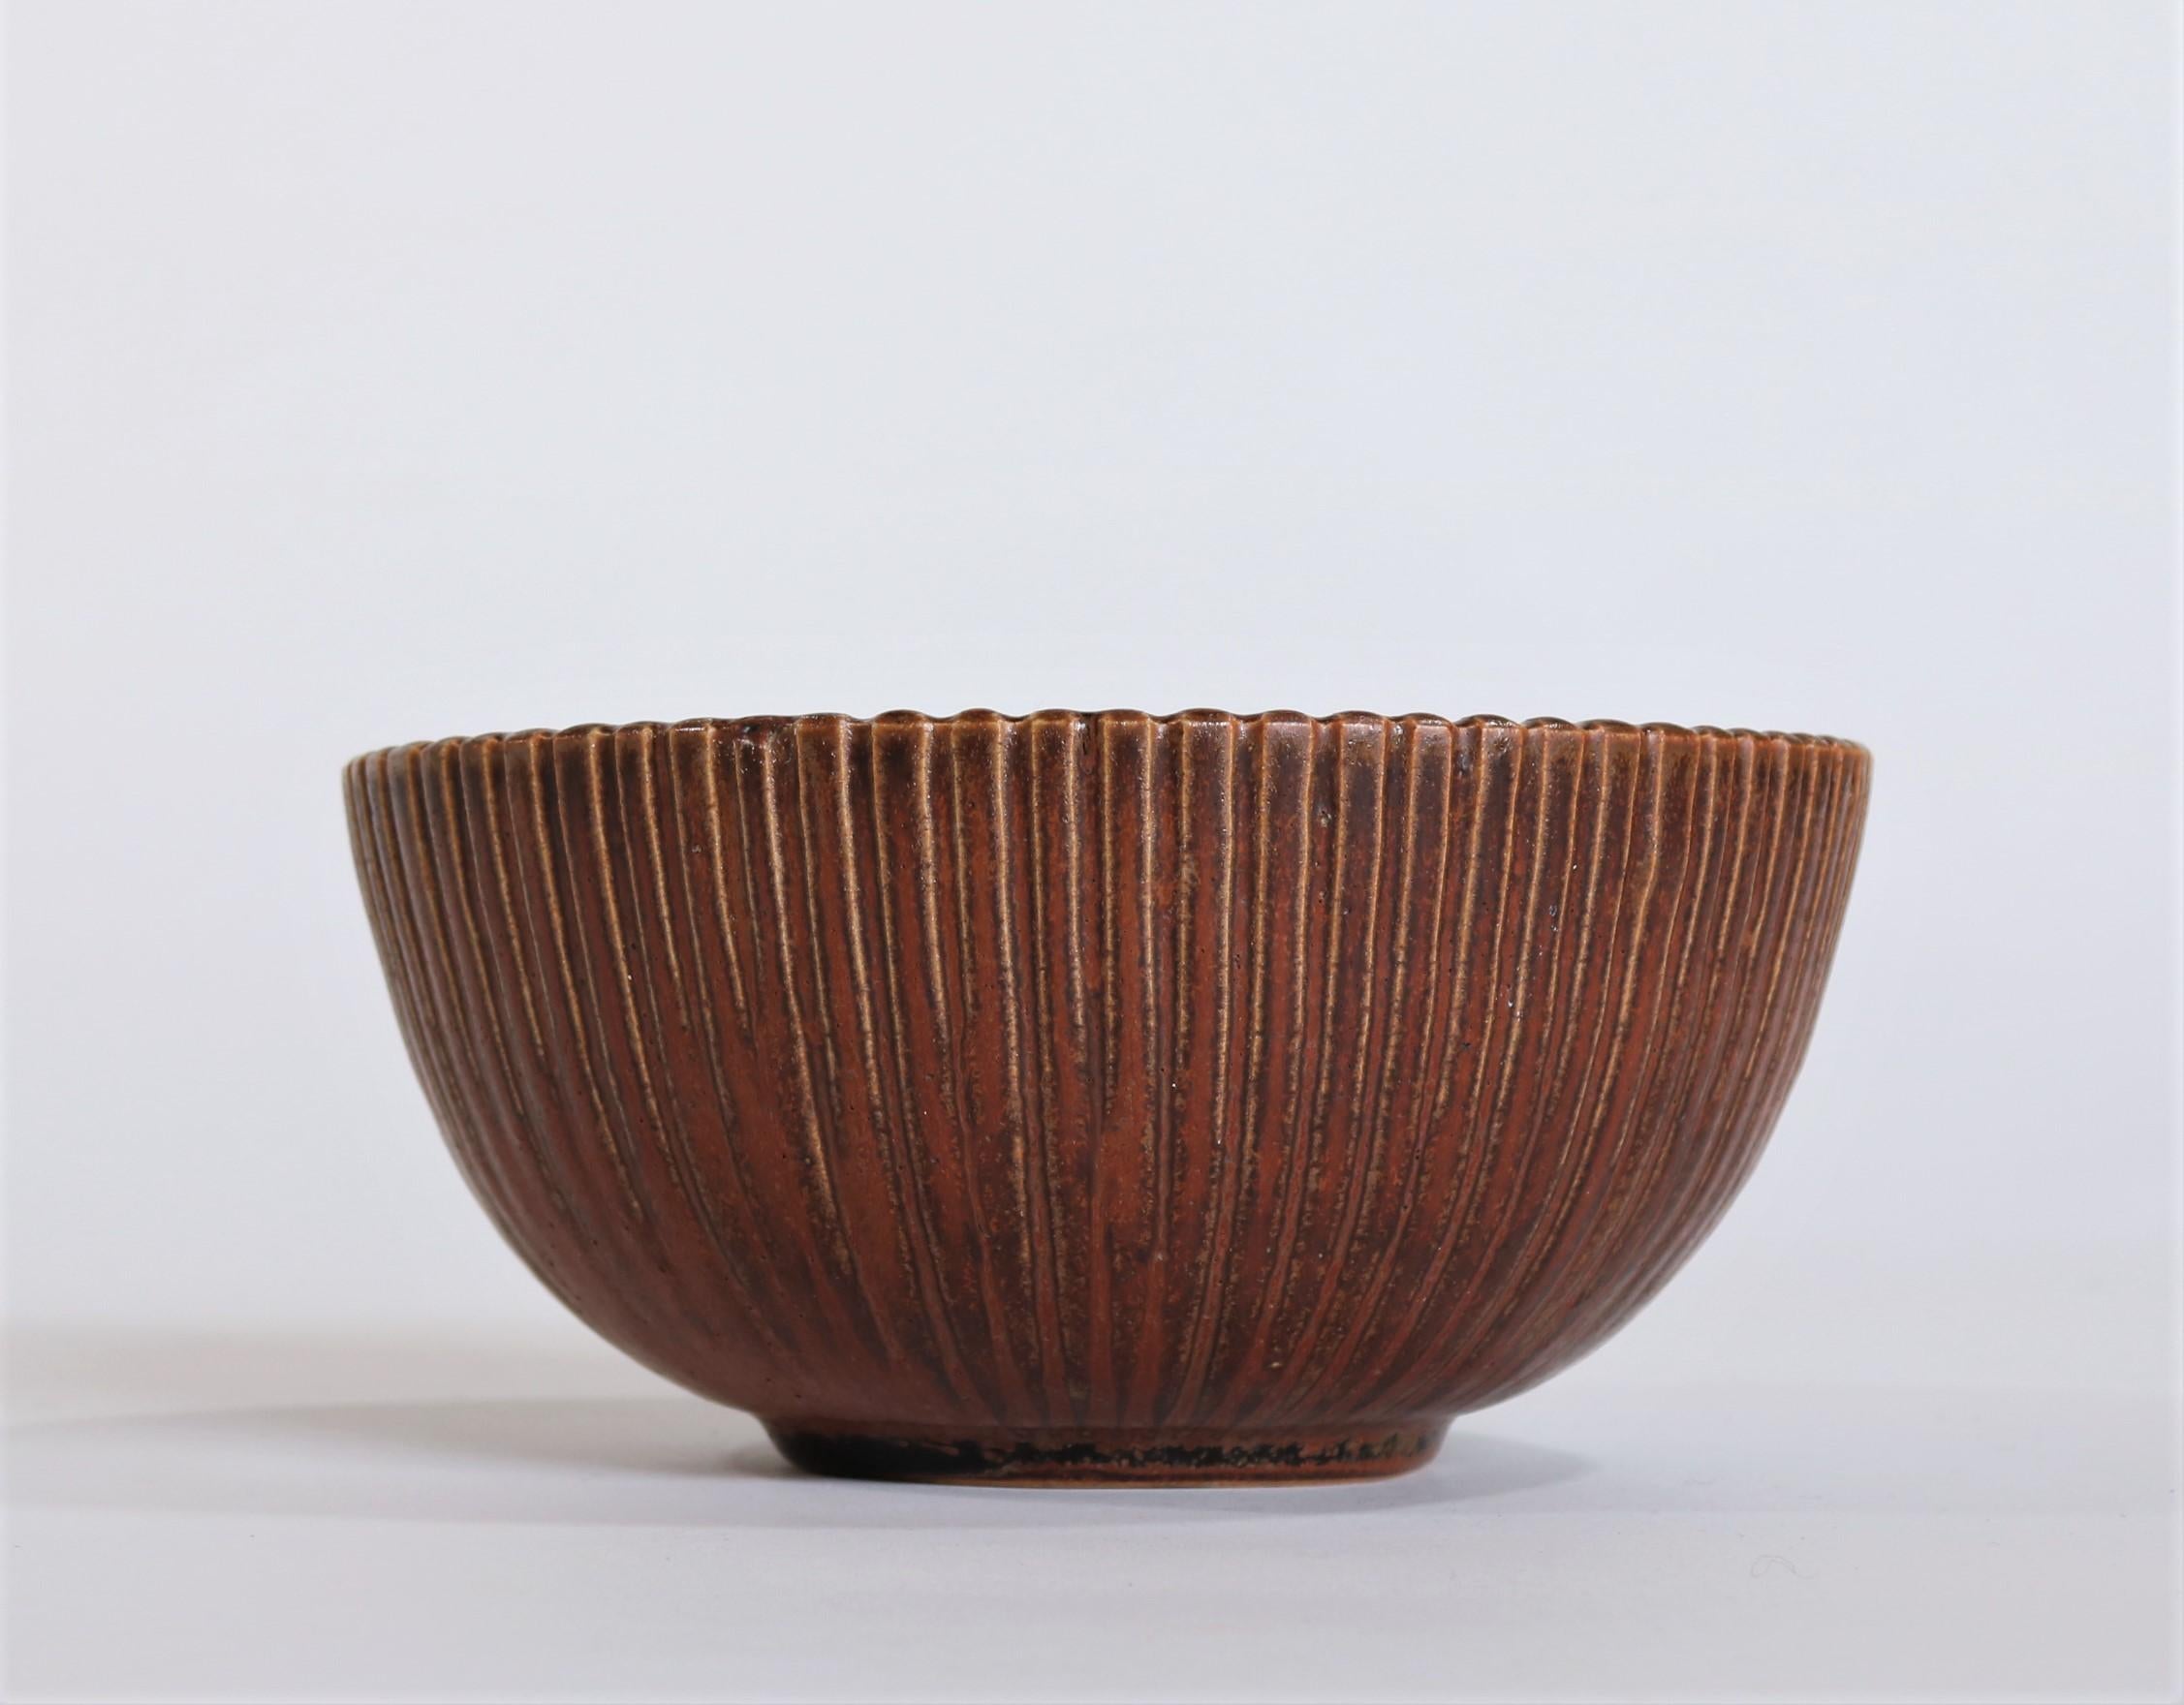 Fluted stoneware bowl with dark red oxblood glaze made by Danish artist Arne Bang at his own studio in Copenhagen the 1930s. Signed with monogram 